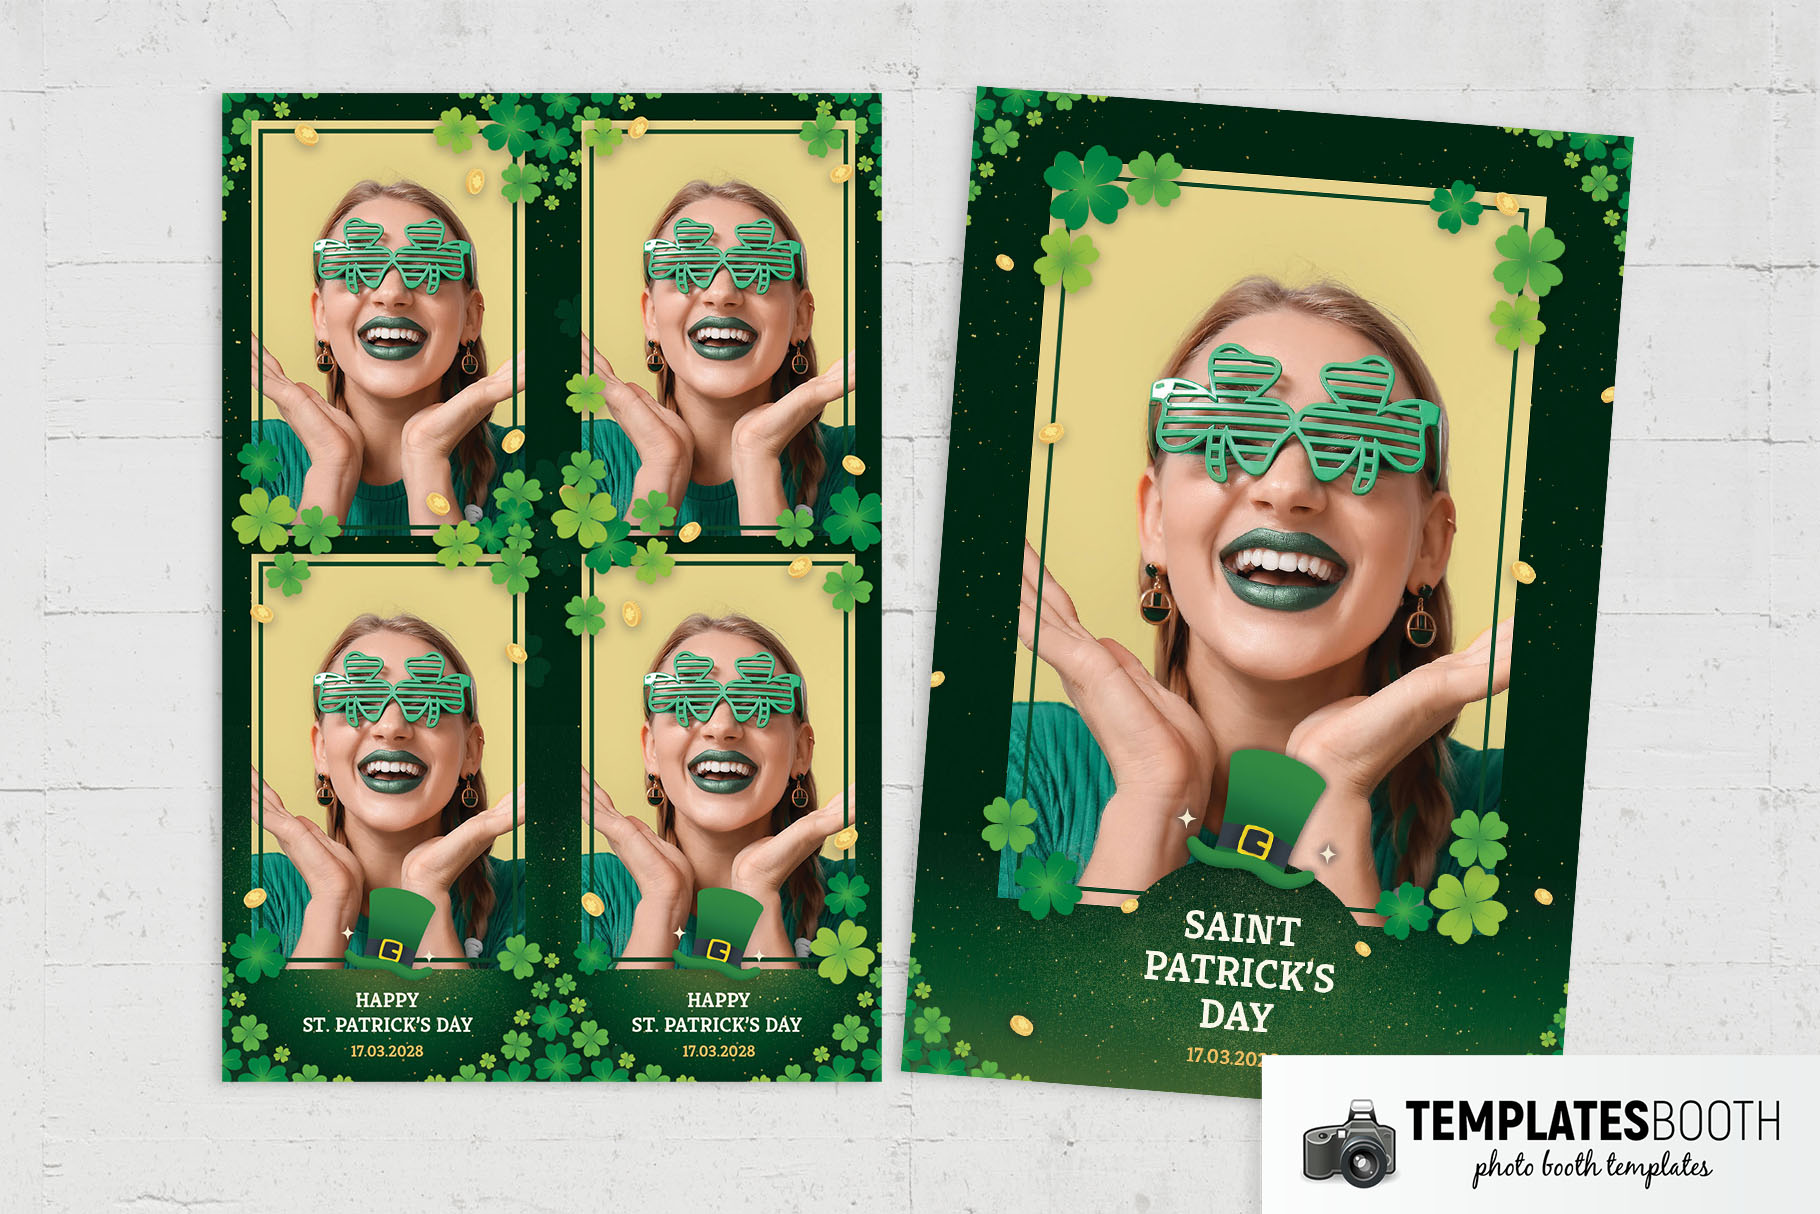 Saint Patrick's Day Photo Booth Template